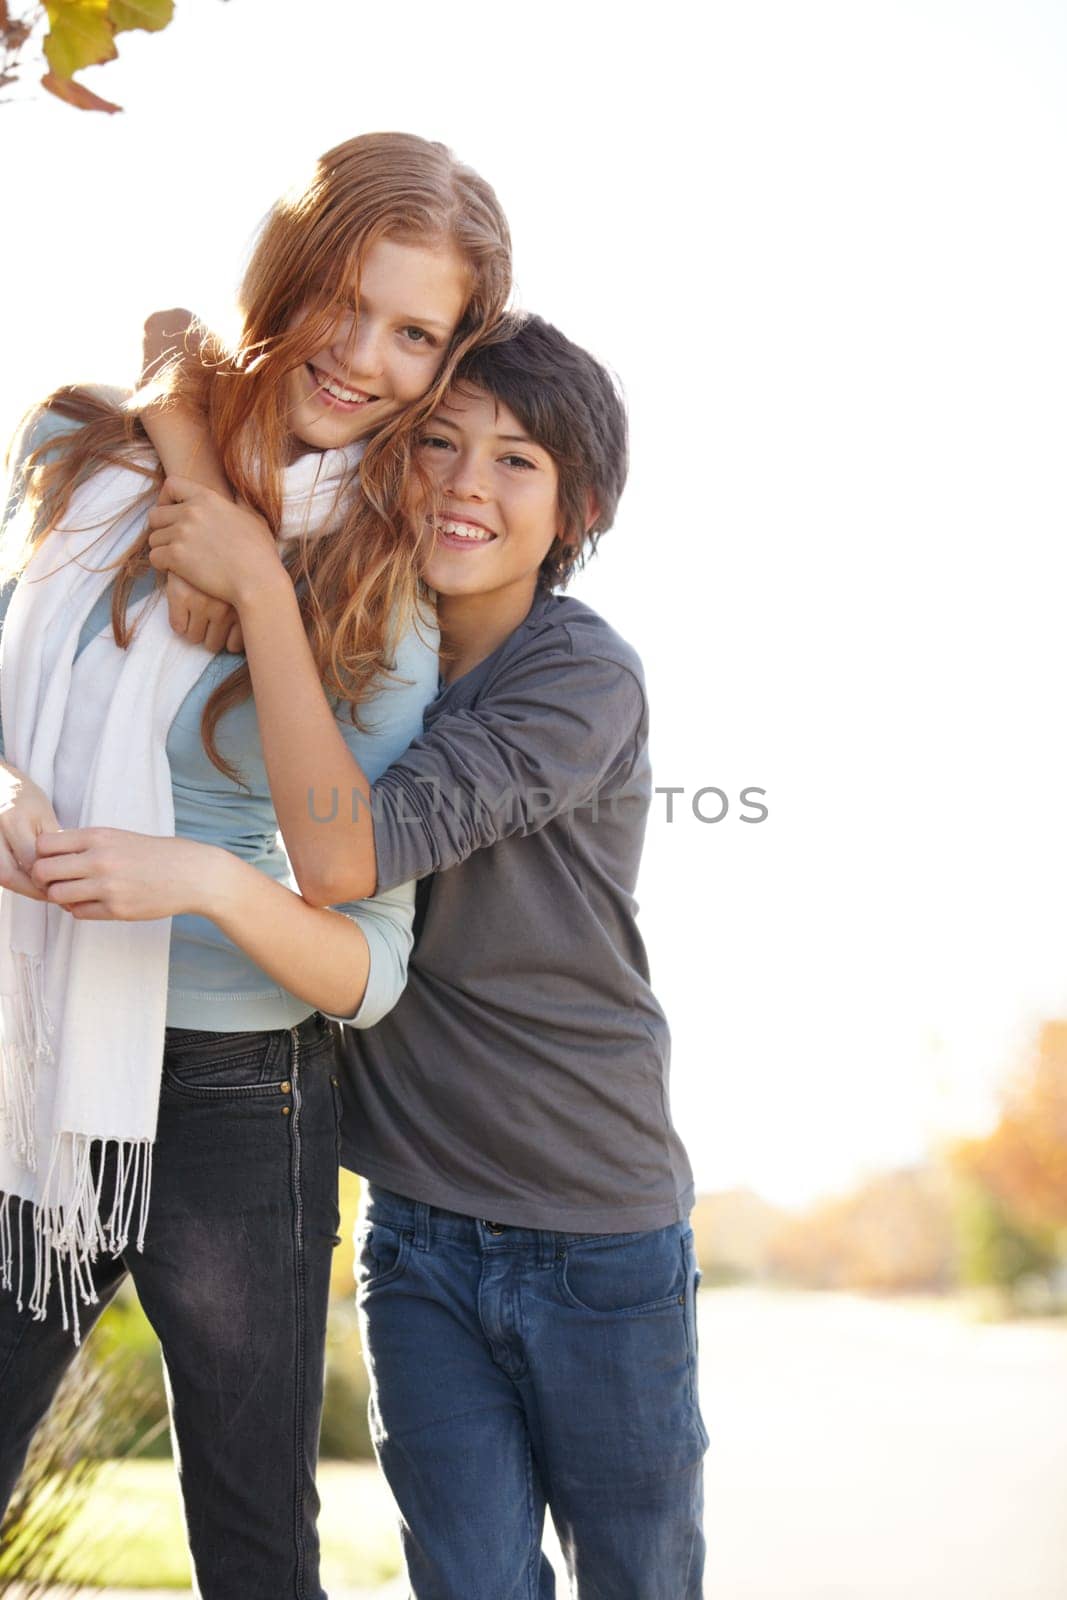 Love, portrait of brother with sister and hug outdoors for support with a lens flare with smile. Care or bonding time, family and happy people hugging outside together for health wellness in nature.